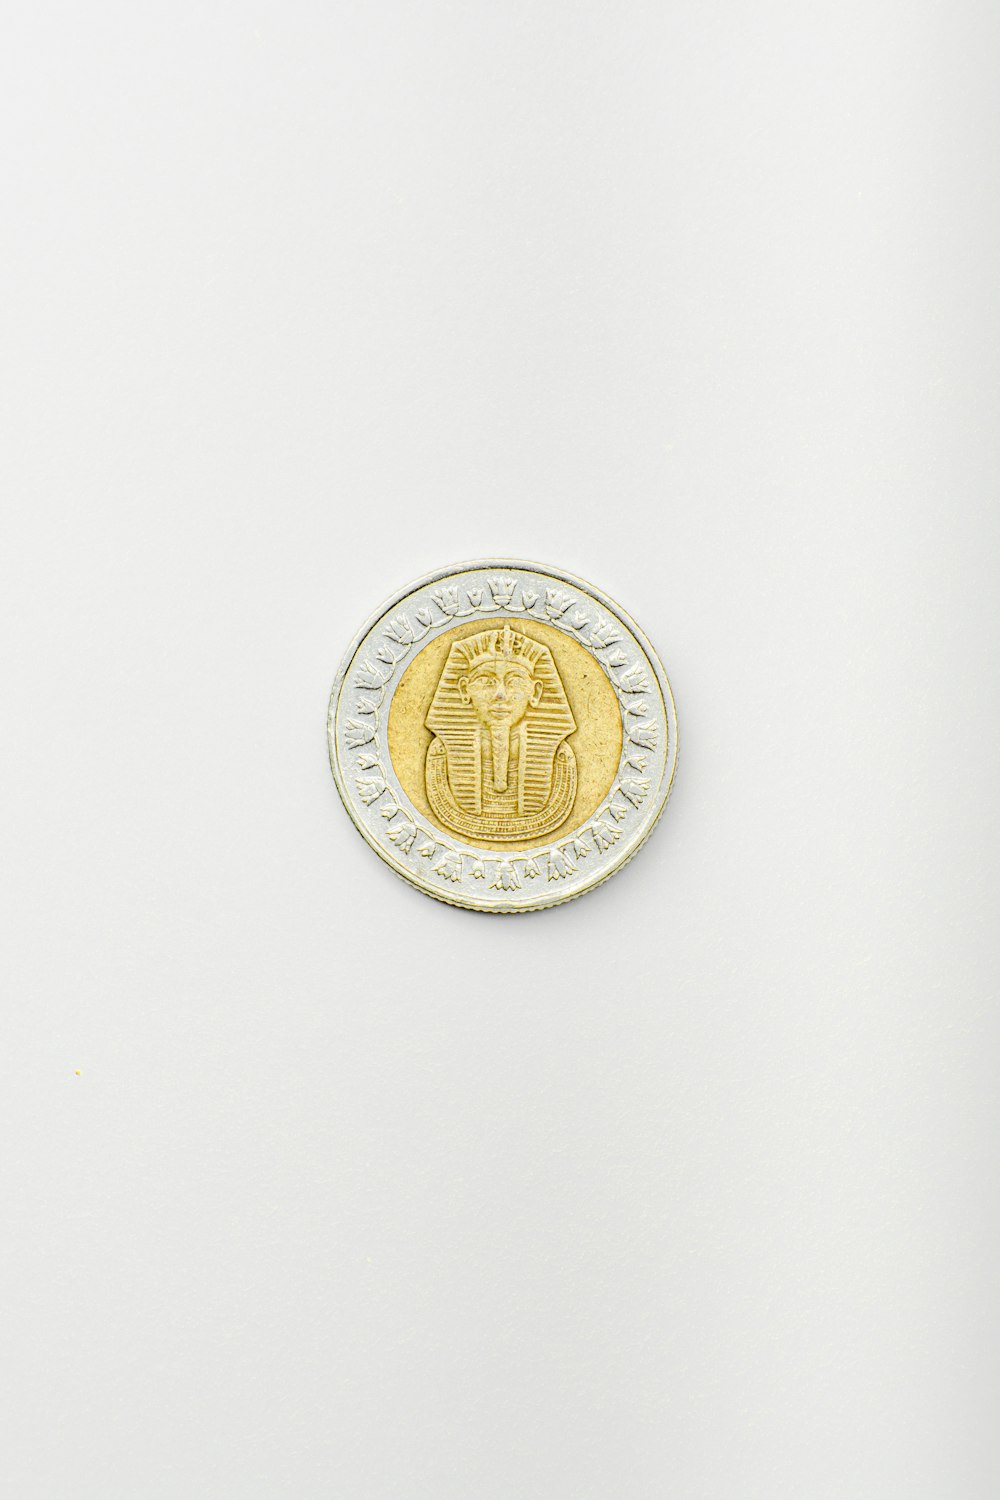 a coin with a gold design